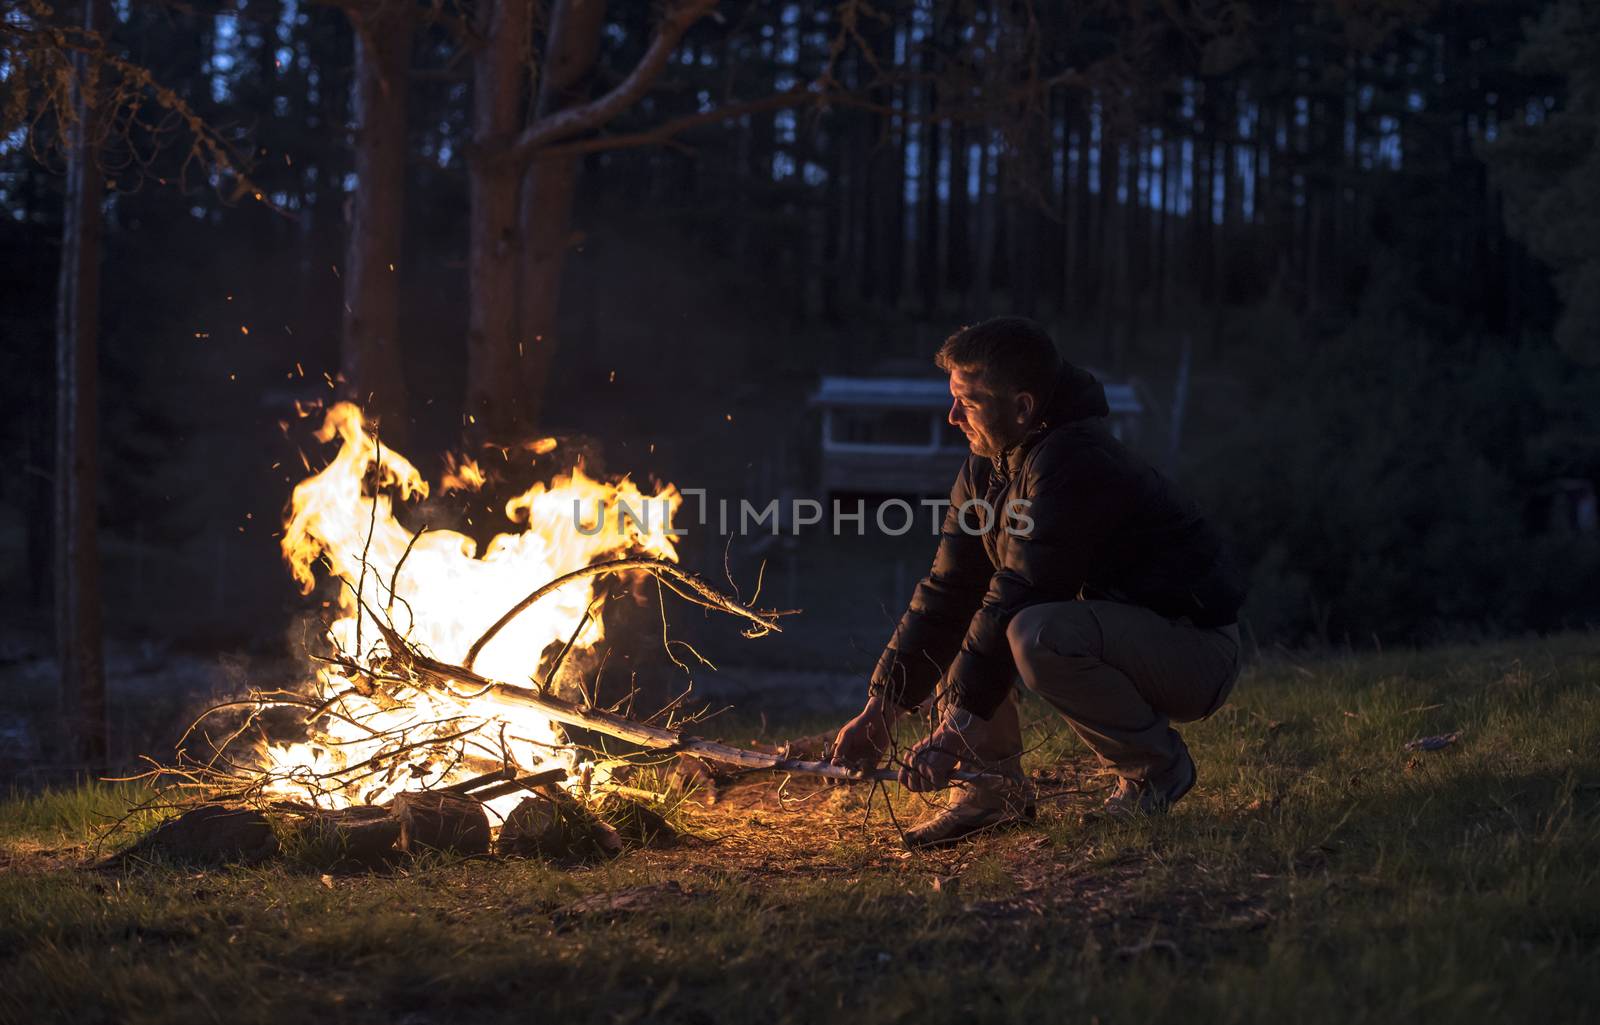 Man lights a fire in the fireplace in nature at night.